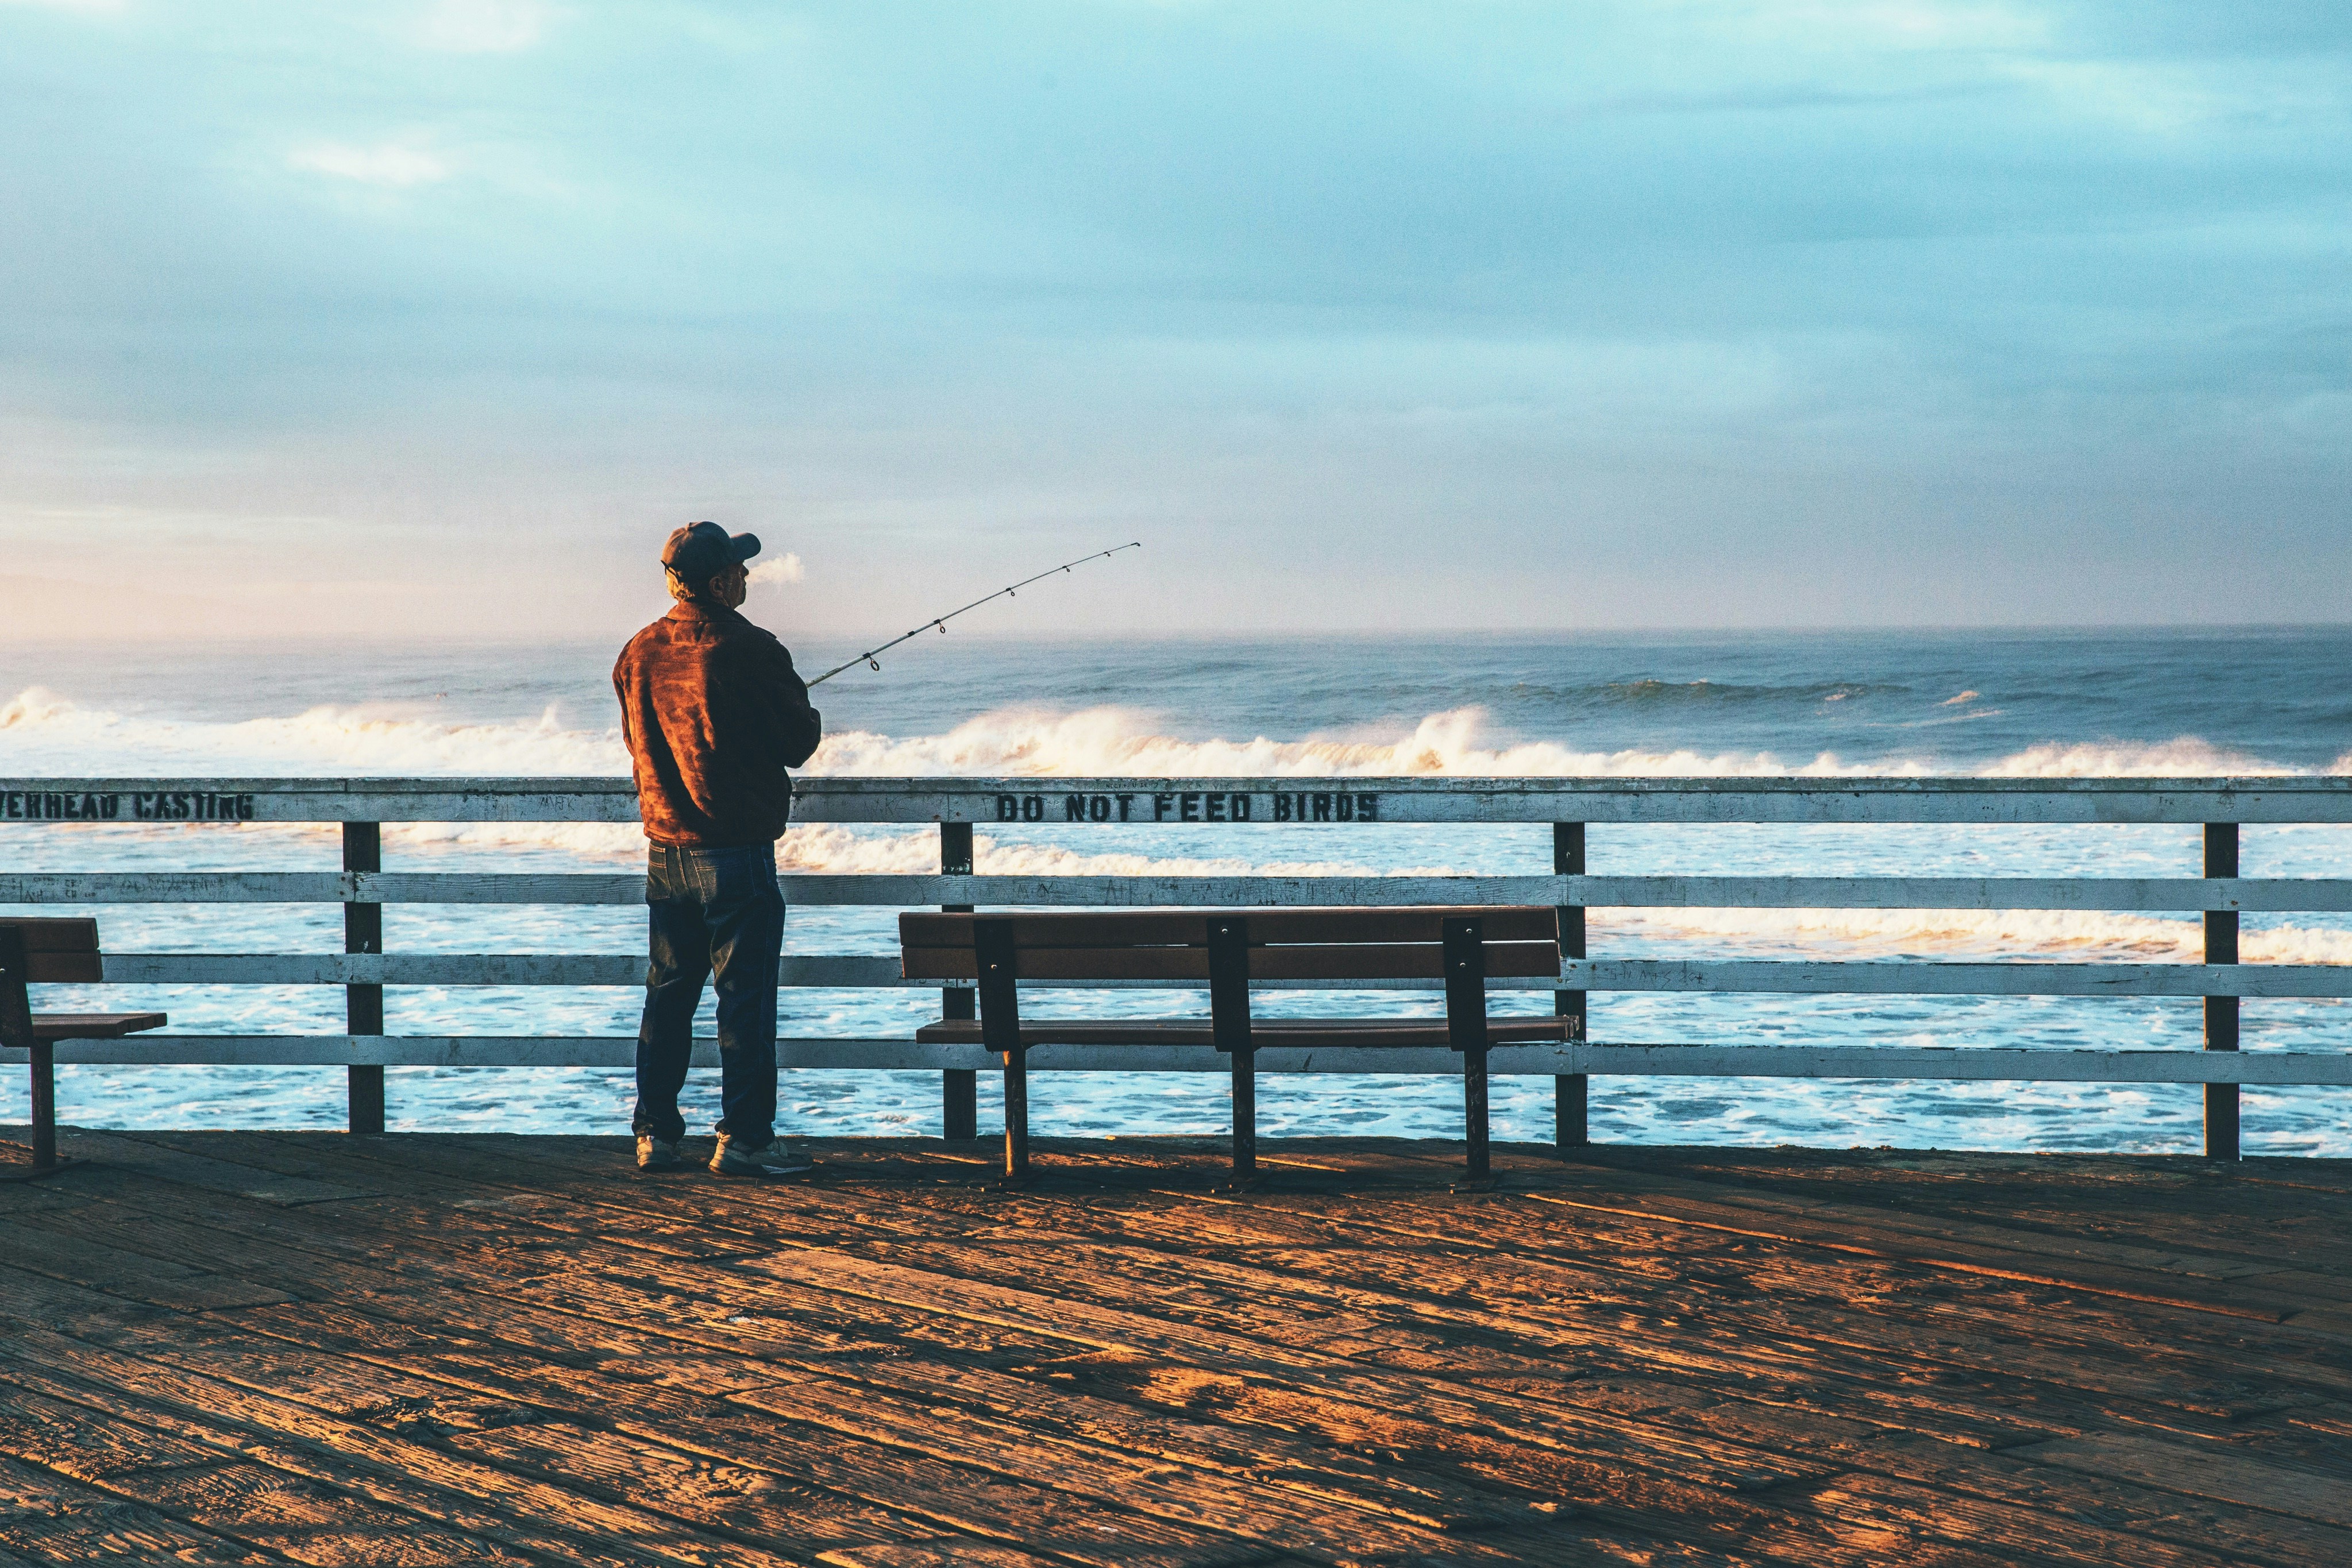 An early fisherman’s morning at Pismo Beach Pier.